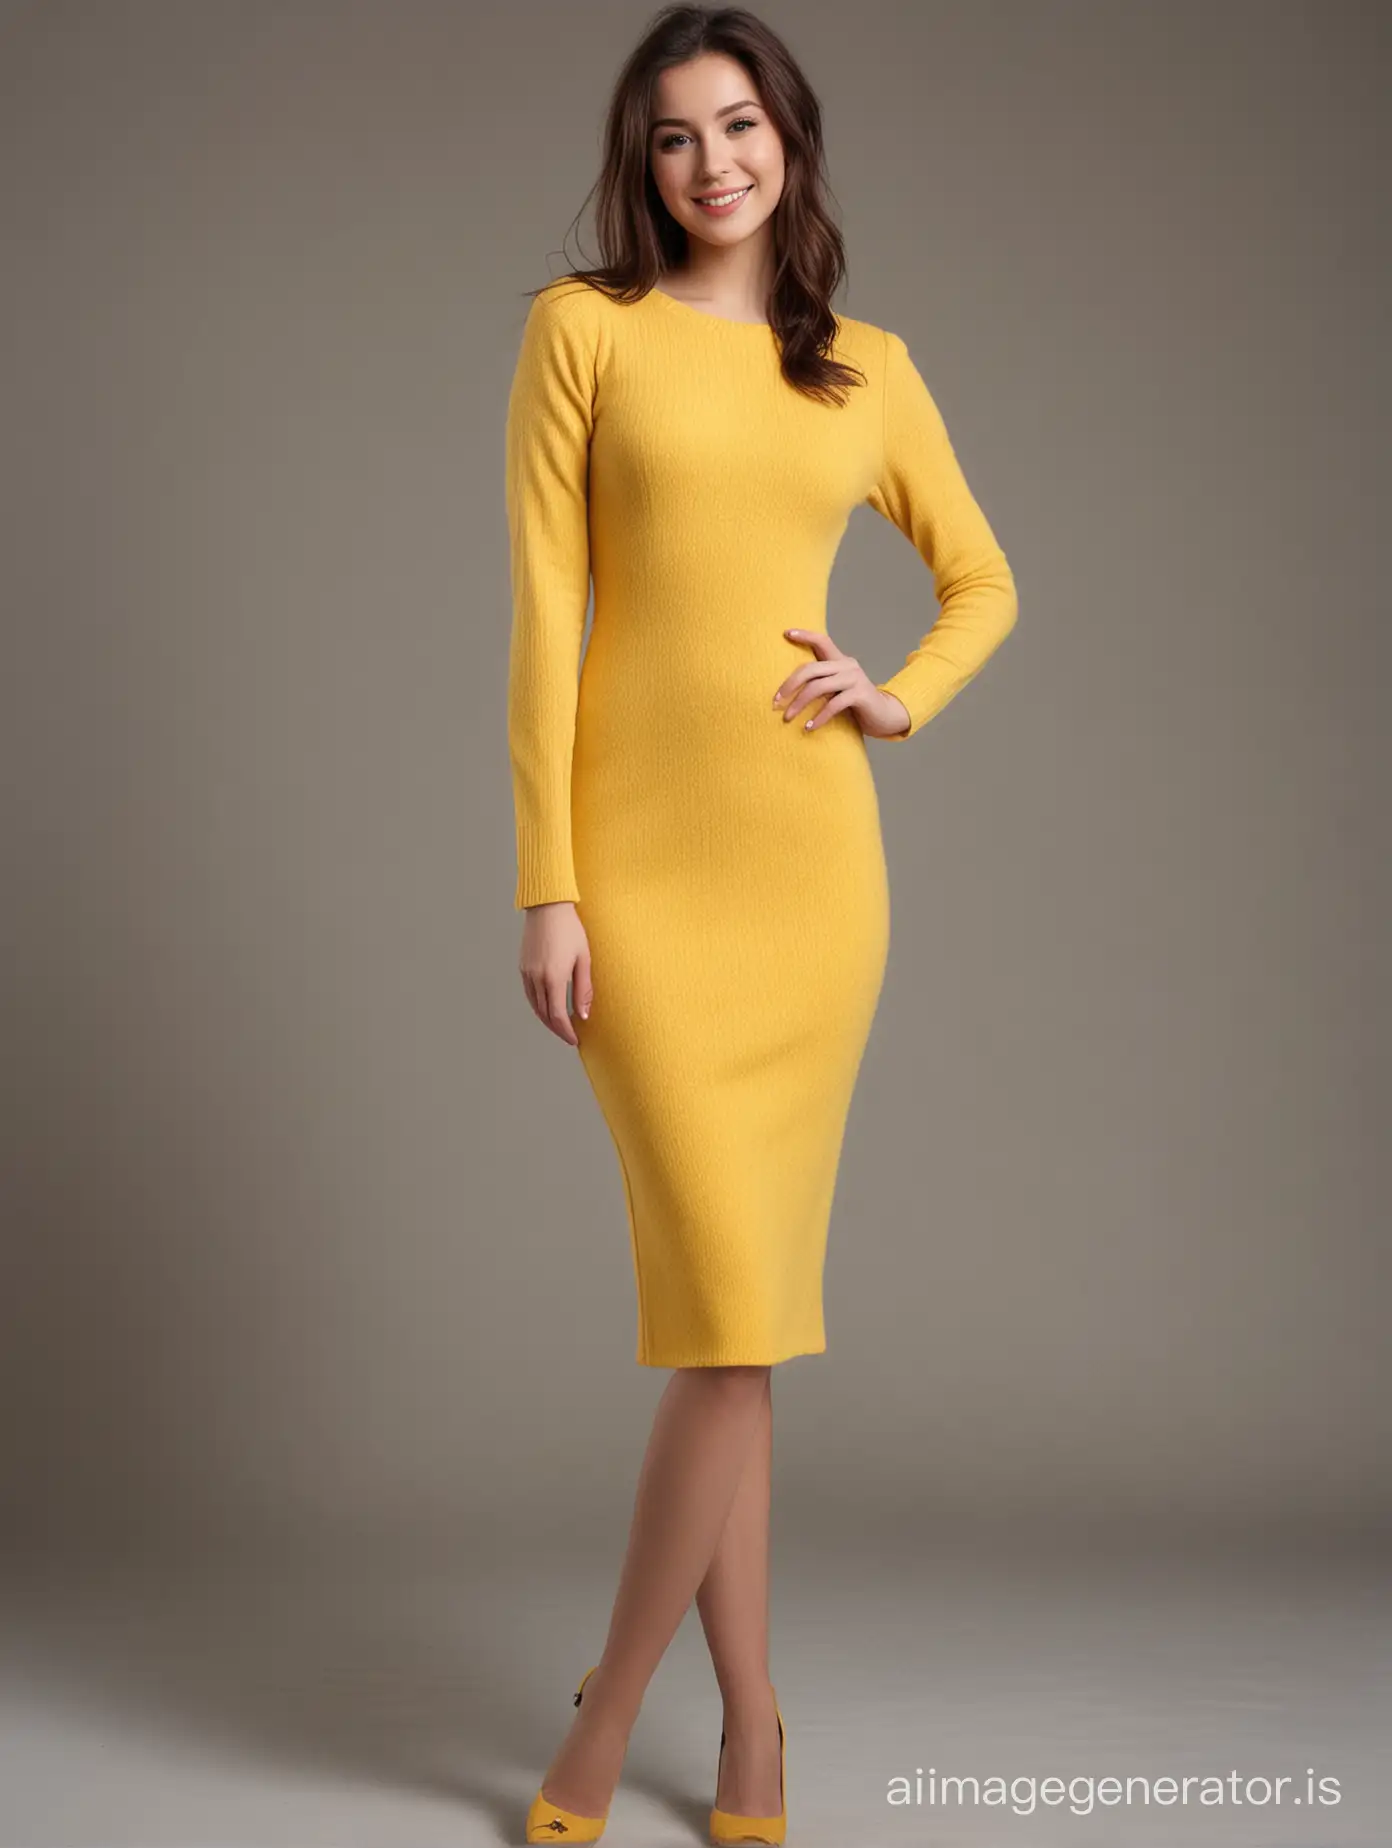 full body shot, full legs, full-length photography, full shot,  full body, full height ,the most beautiful girly in a long pencil dress posing for a picture, a long woolen dress, a yellow dress, outfit photo,  body complet, high detail product photo, attractive girl, fancy ,  cute , smiling seductively, elegant outfit,